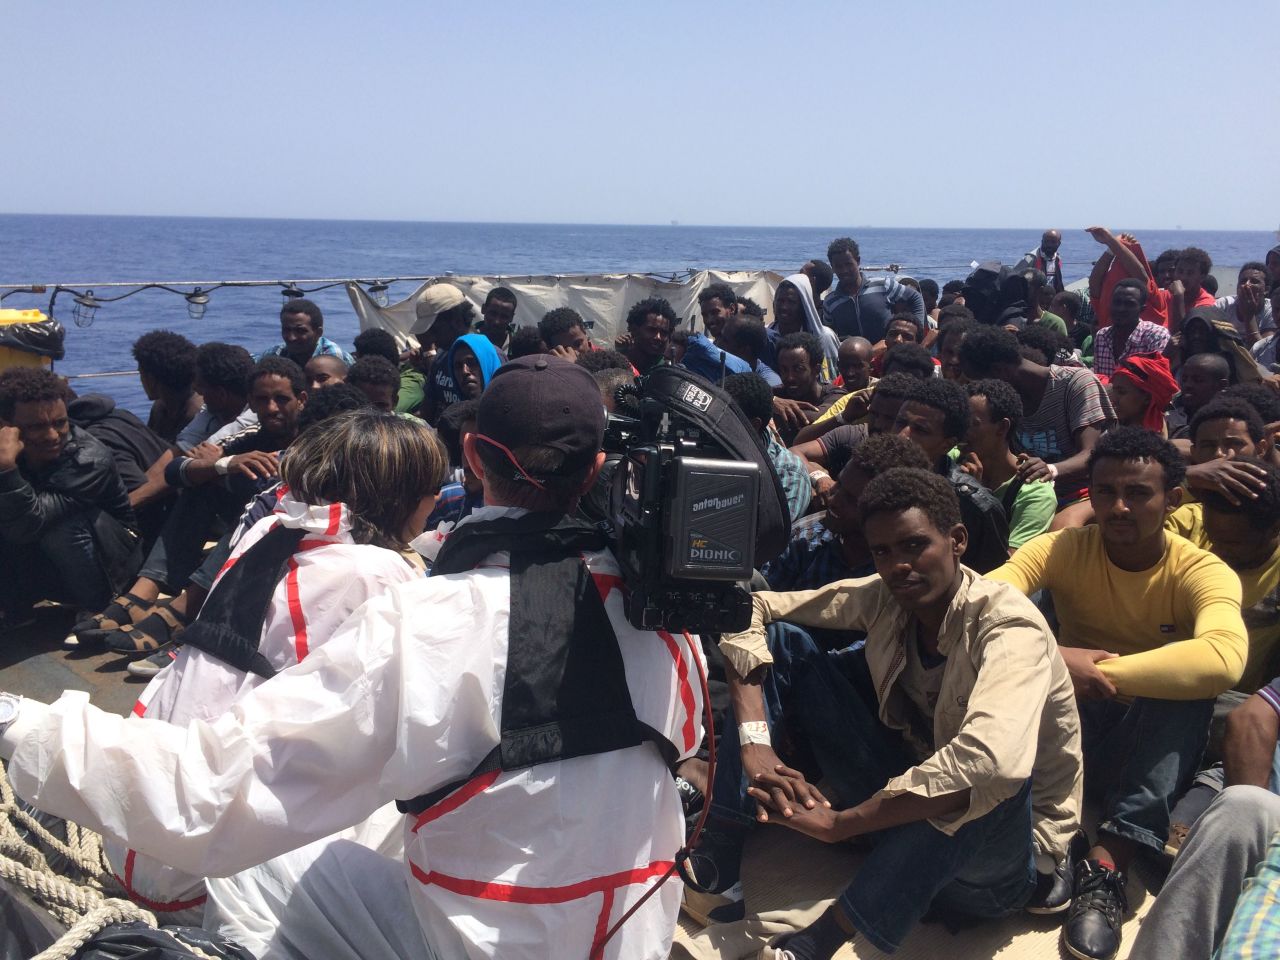 CNN Chief International Correspondent Christiane Amanpour was onboard an Italian Navy vessel Wednesday as it rescued hundreds of desperate African refugees and migrants trying to reach Europe via the Mediterranean Sea